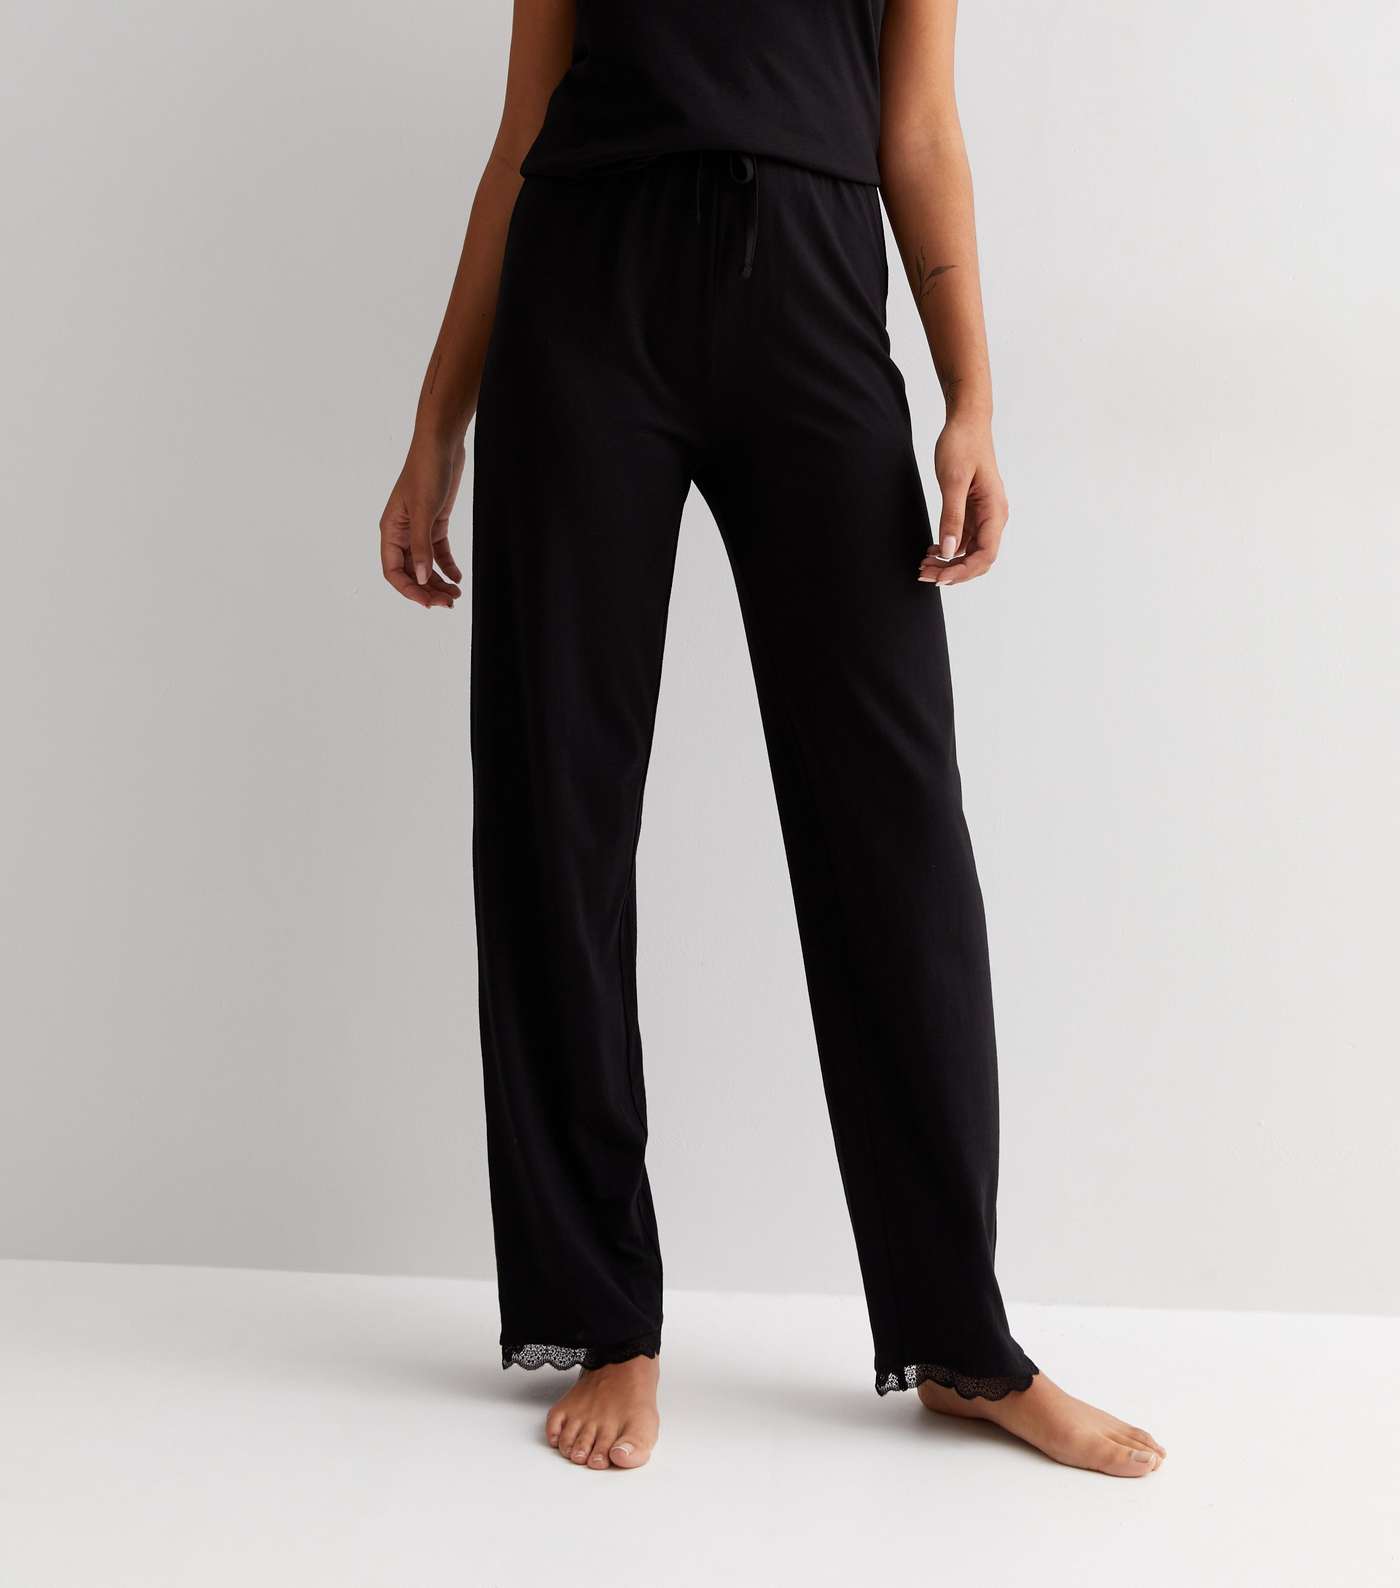 Tall Black Modal Lace Trim Trousers Image 3